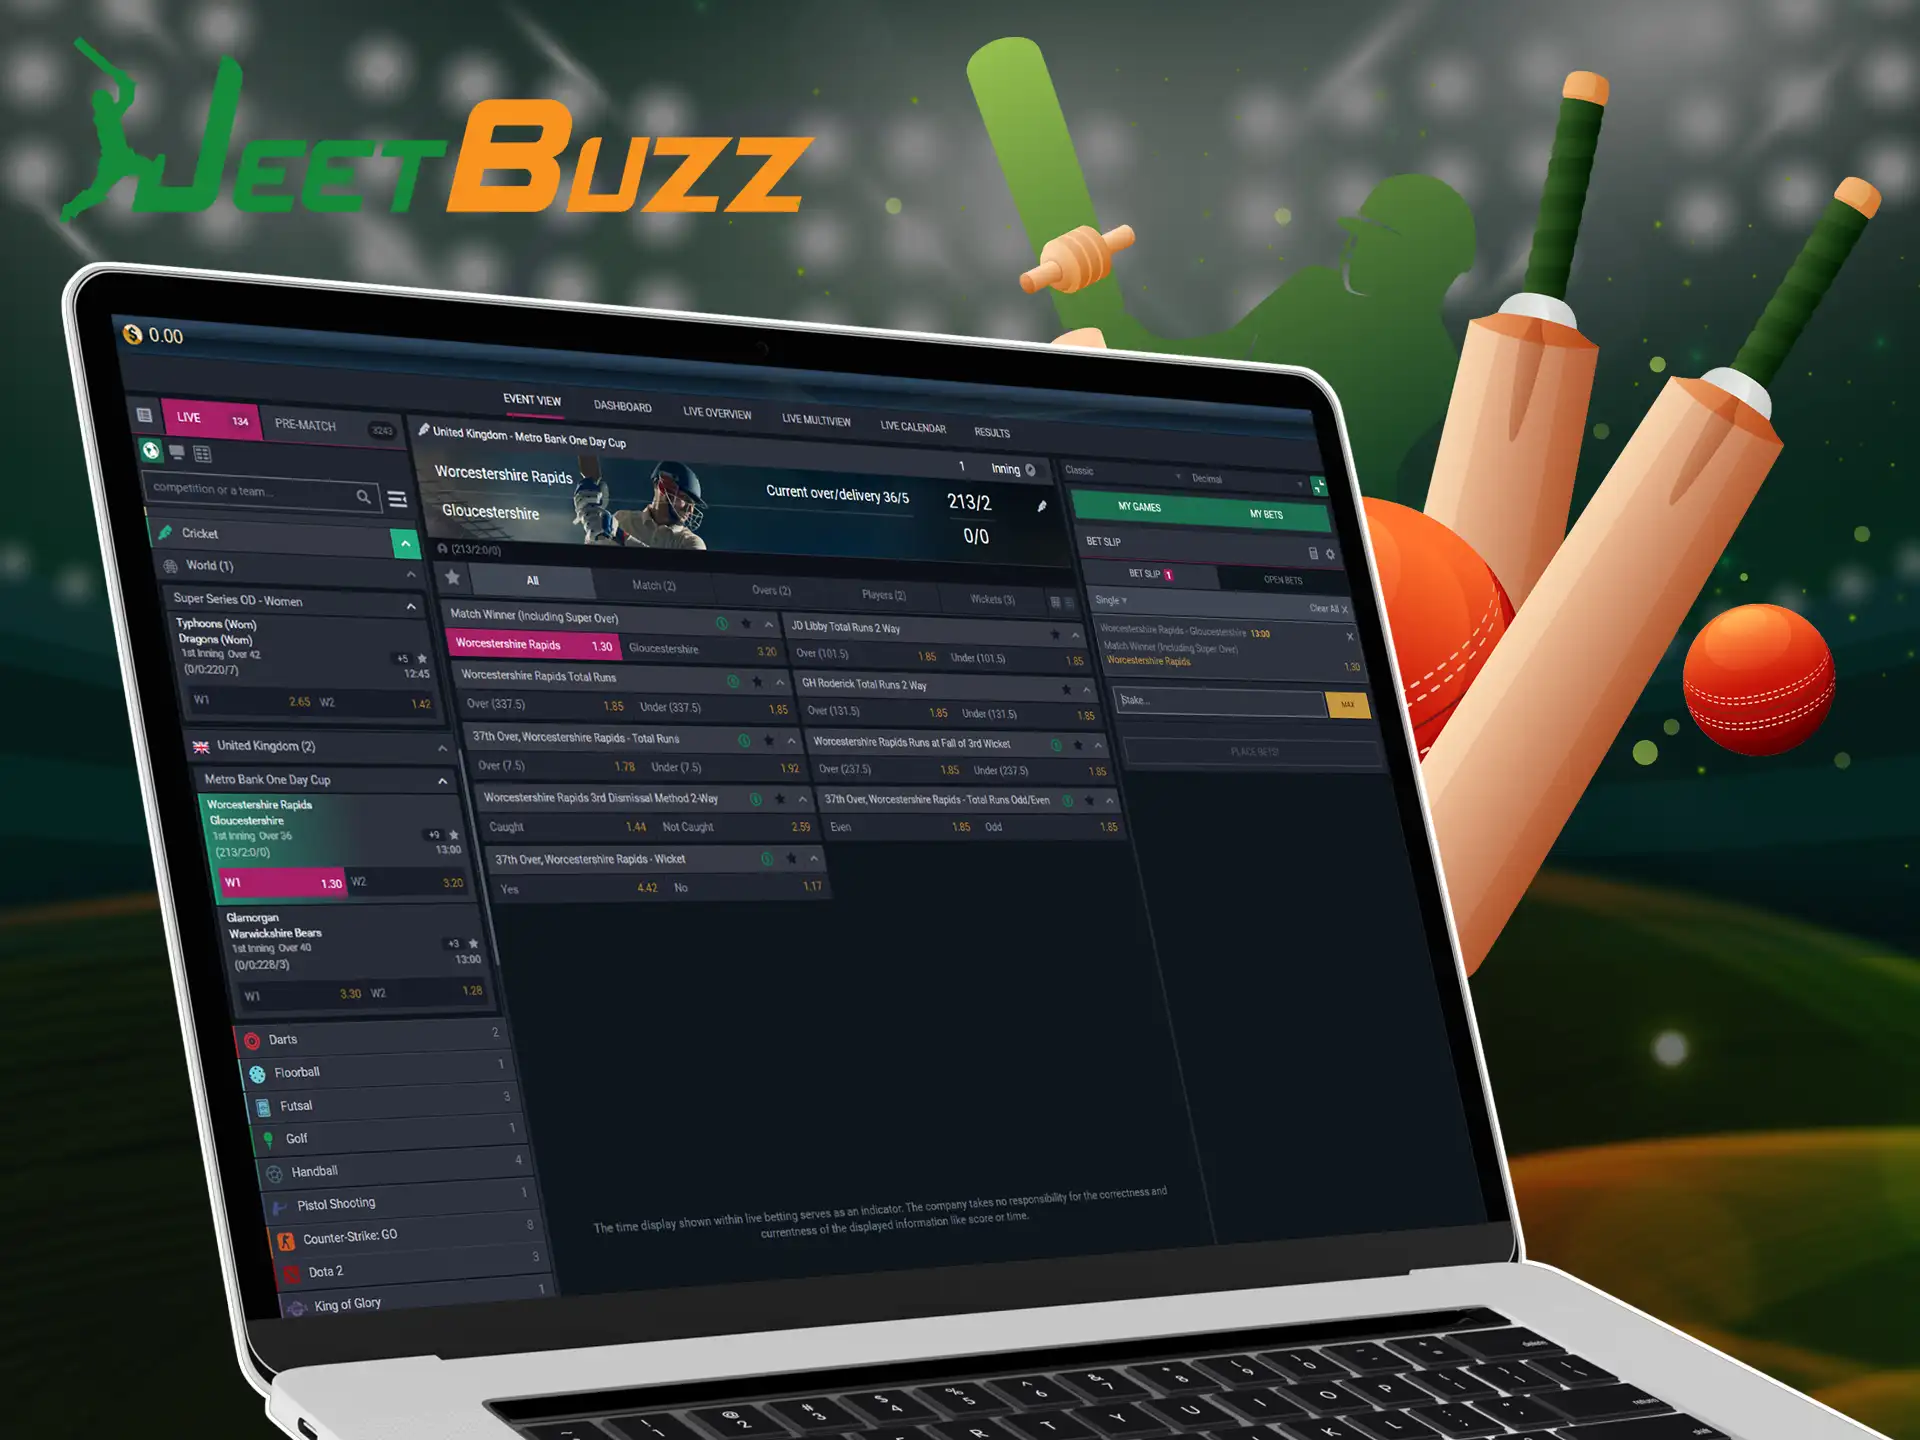 Bet on cricket at JeetBuzz and win real money.